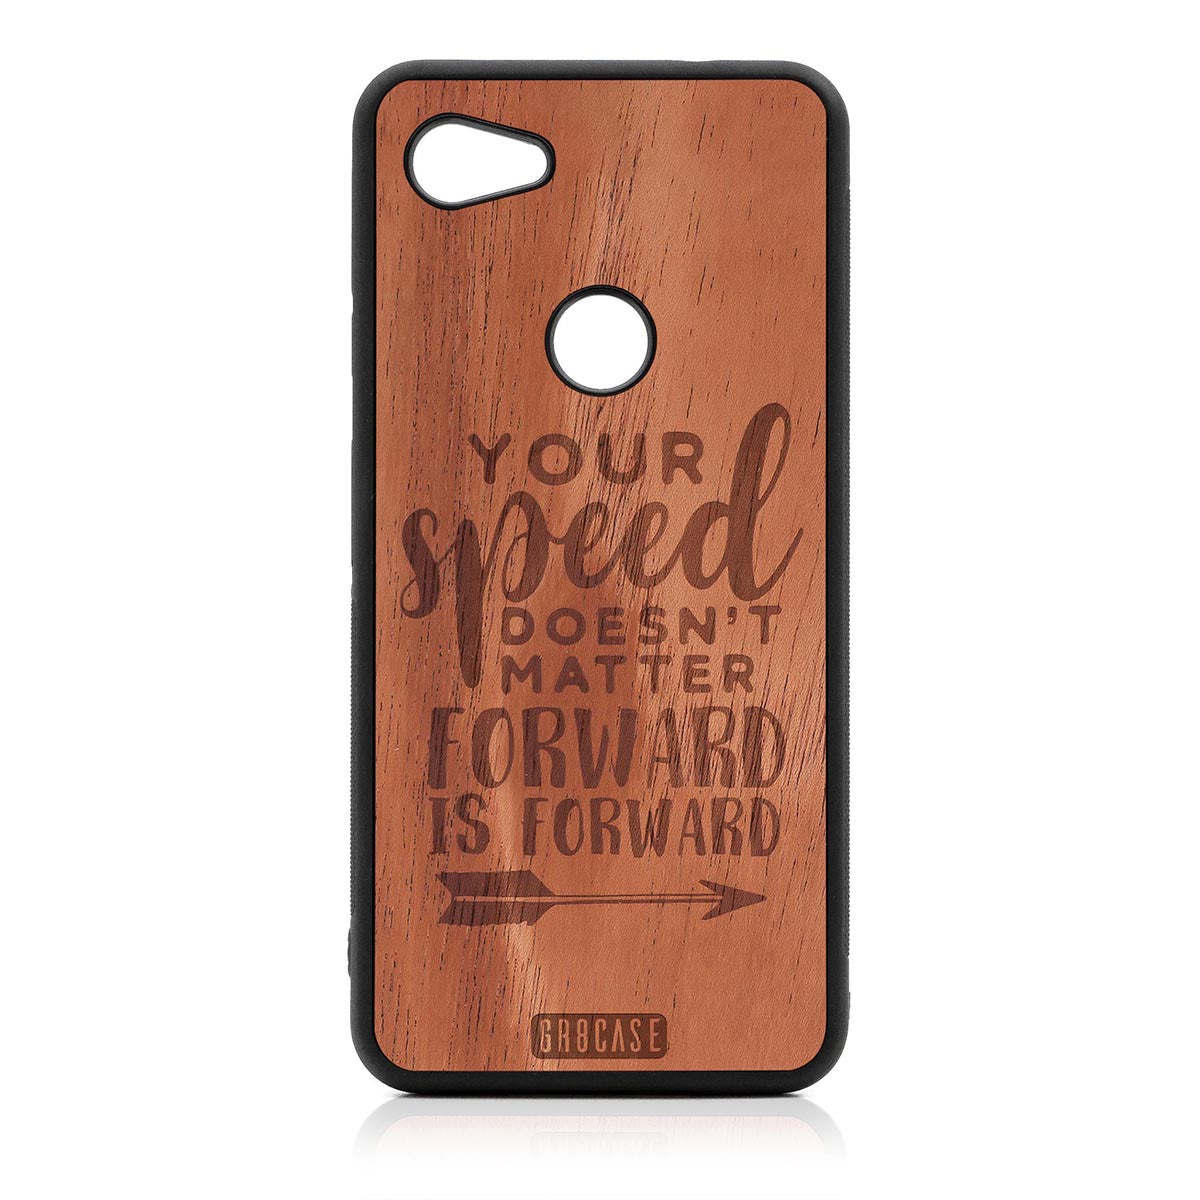 Your Speed Doesn't Matter Forward Is Forward Design Wood Case Google Pixel 3A